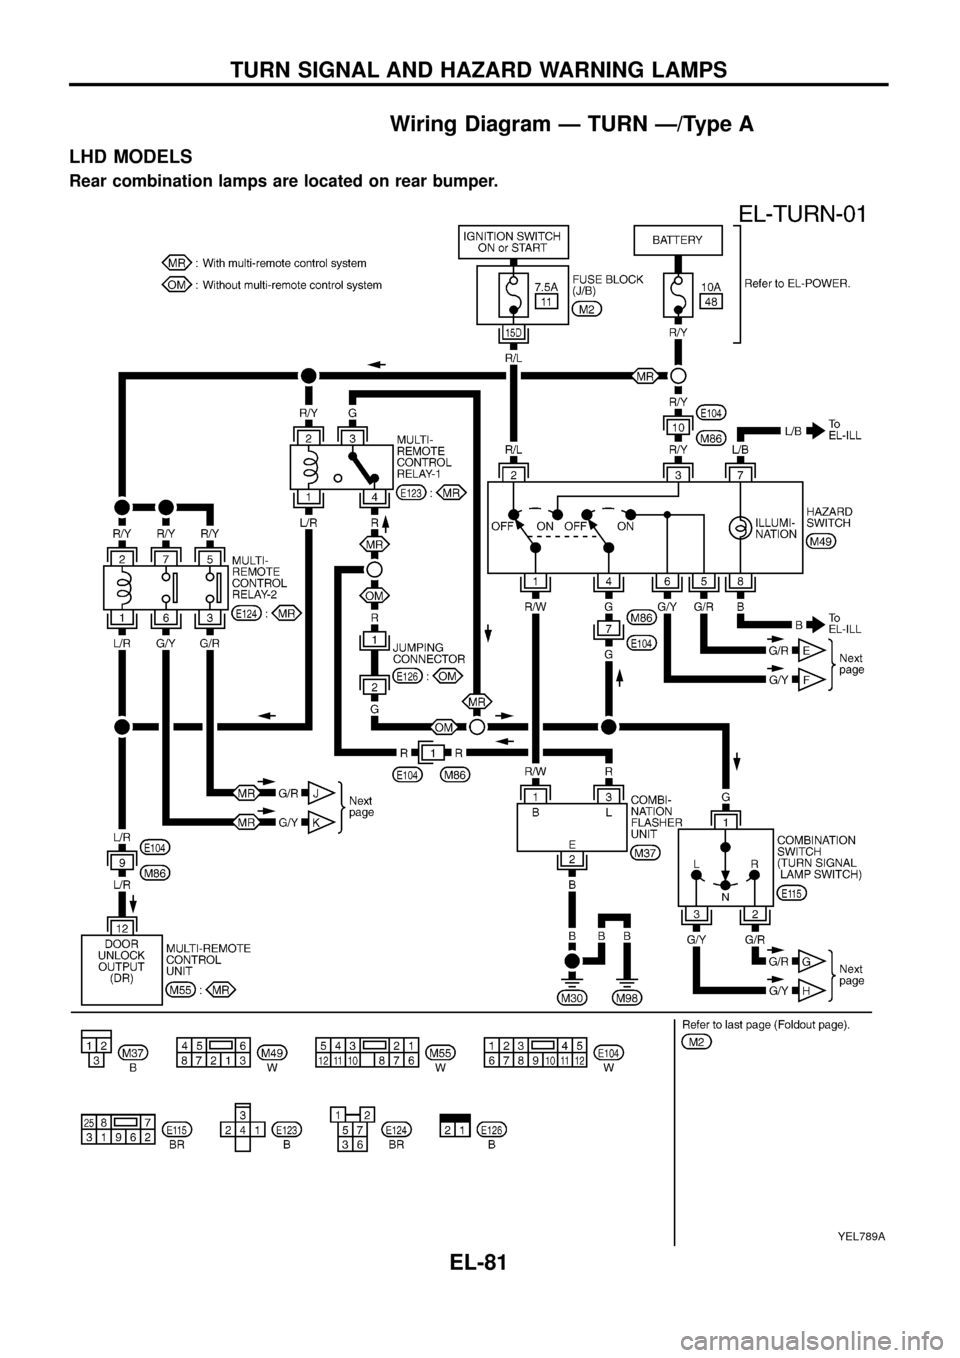 NISSAN PATROL 1998 Y61 / 5.G Electrical System Workshop Manual Wiring Diagram Ð TURN Ð/Type A
LHD MODELS
Rear combination lamps are located on rear bumper.
YEL789A
TURN SIGNAL AND HAZARD WARNING LAMPS
EL-81 